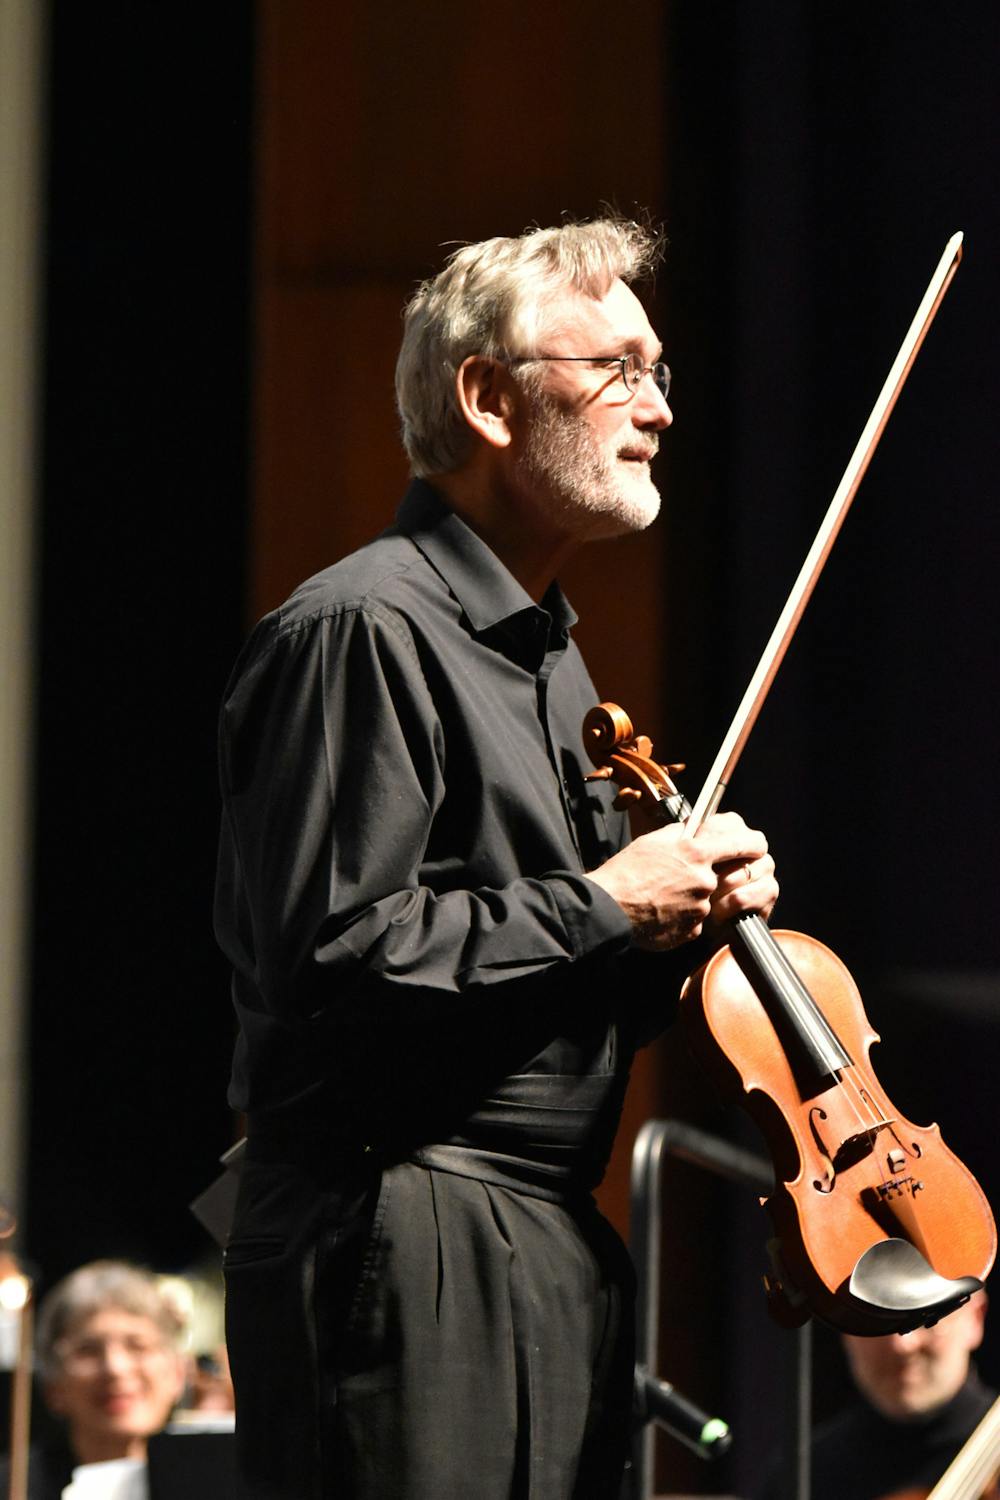 “Don’t forget the arts”: Orchestra director retires after 16 years